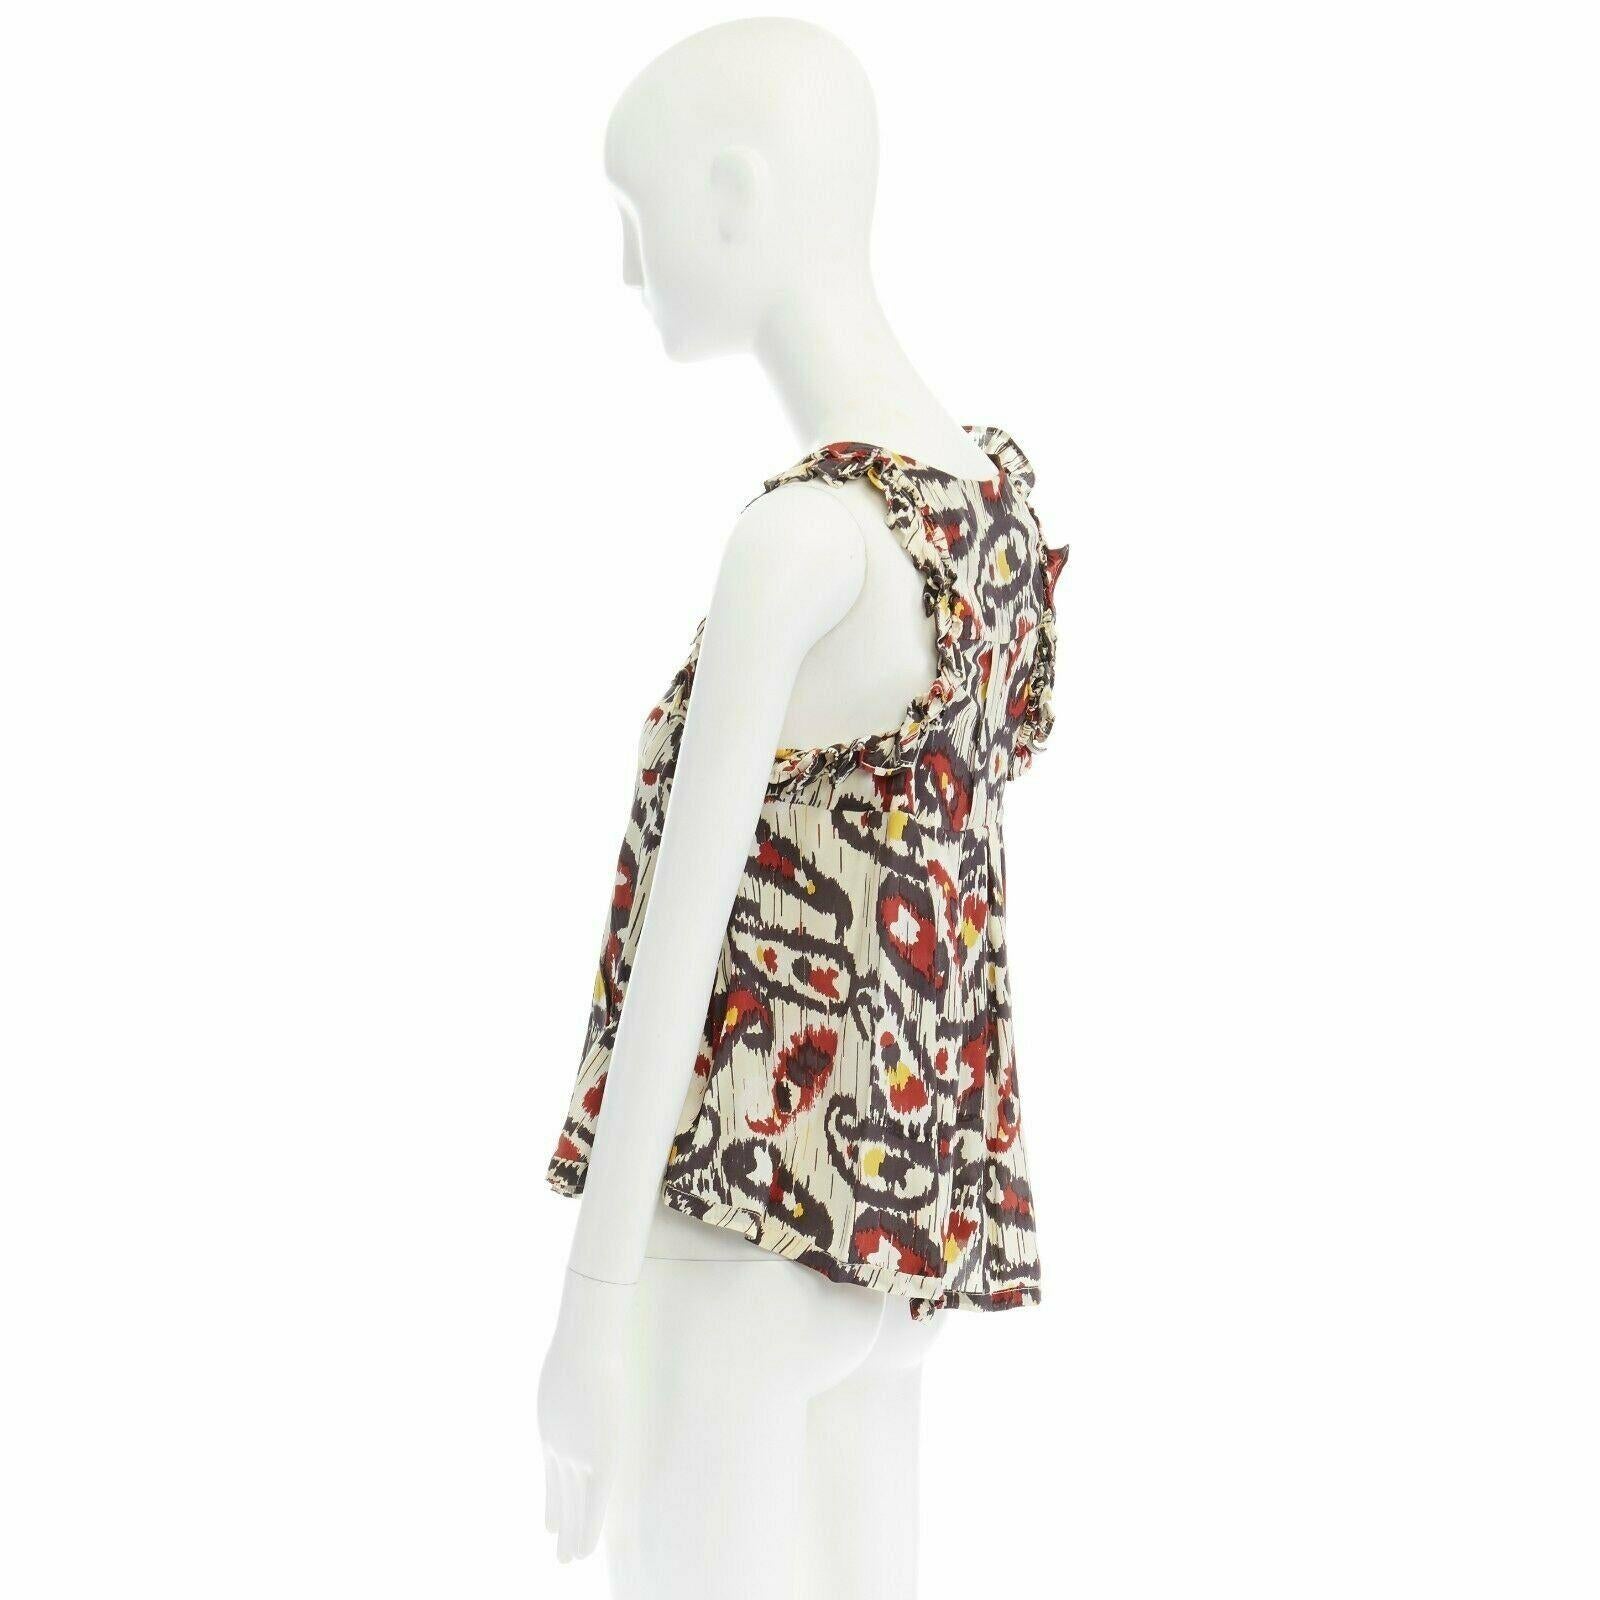 ISABEL MARANT Ikat cream ethnic print silk ruffle cut-out top FR34 XS US2 UK6 For Sale 2